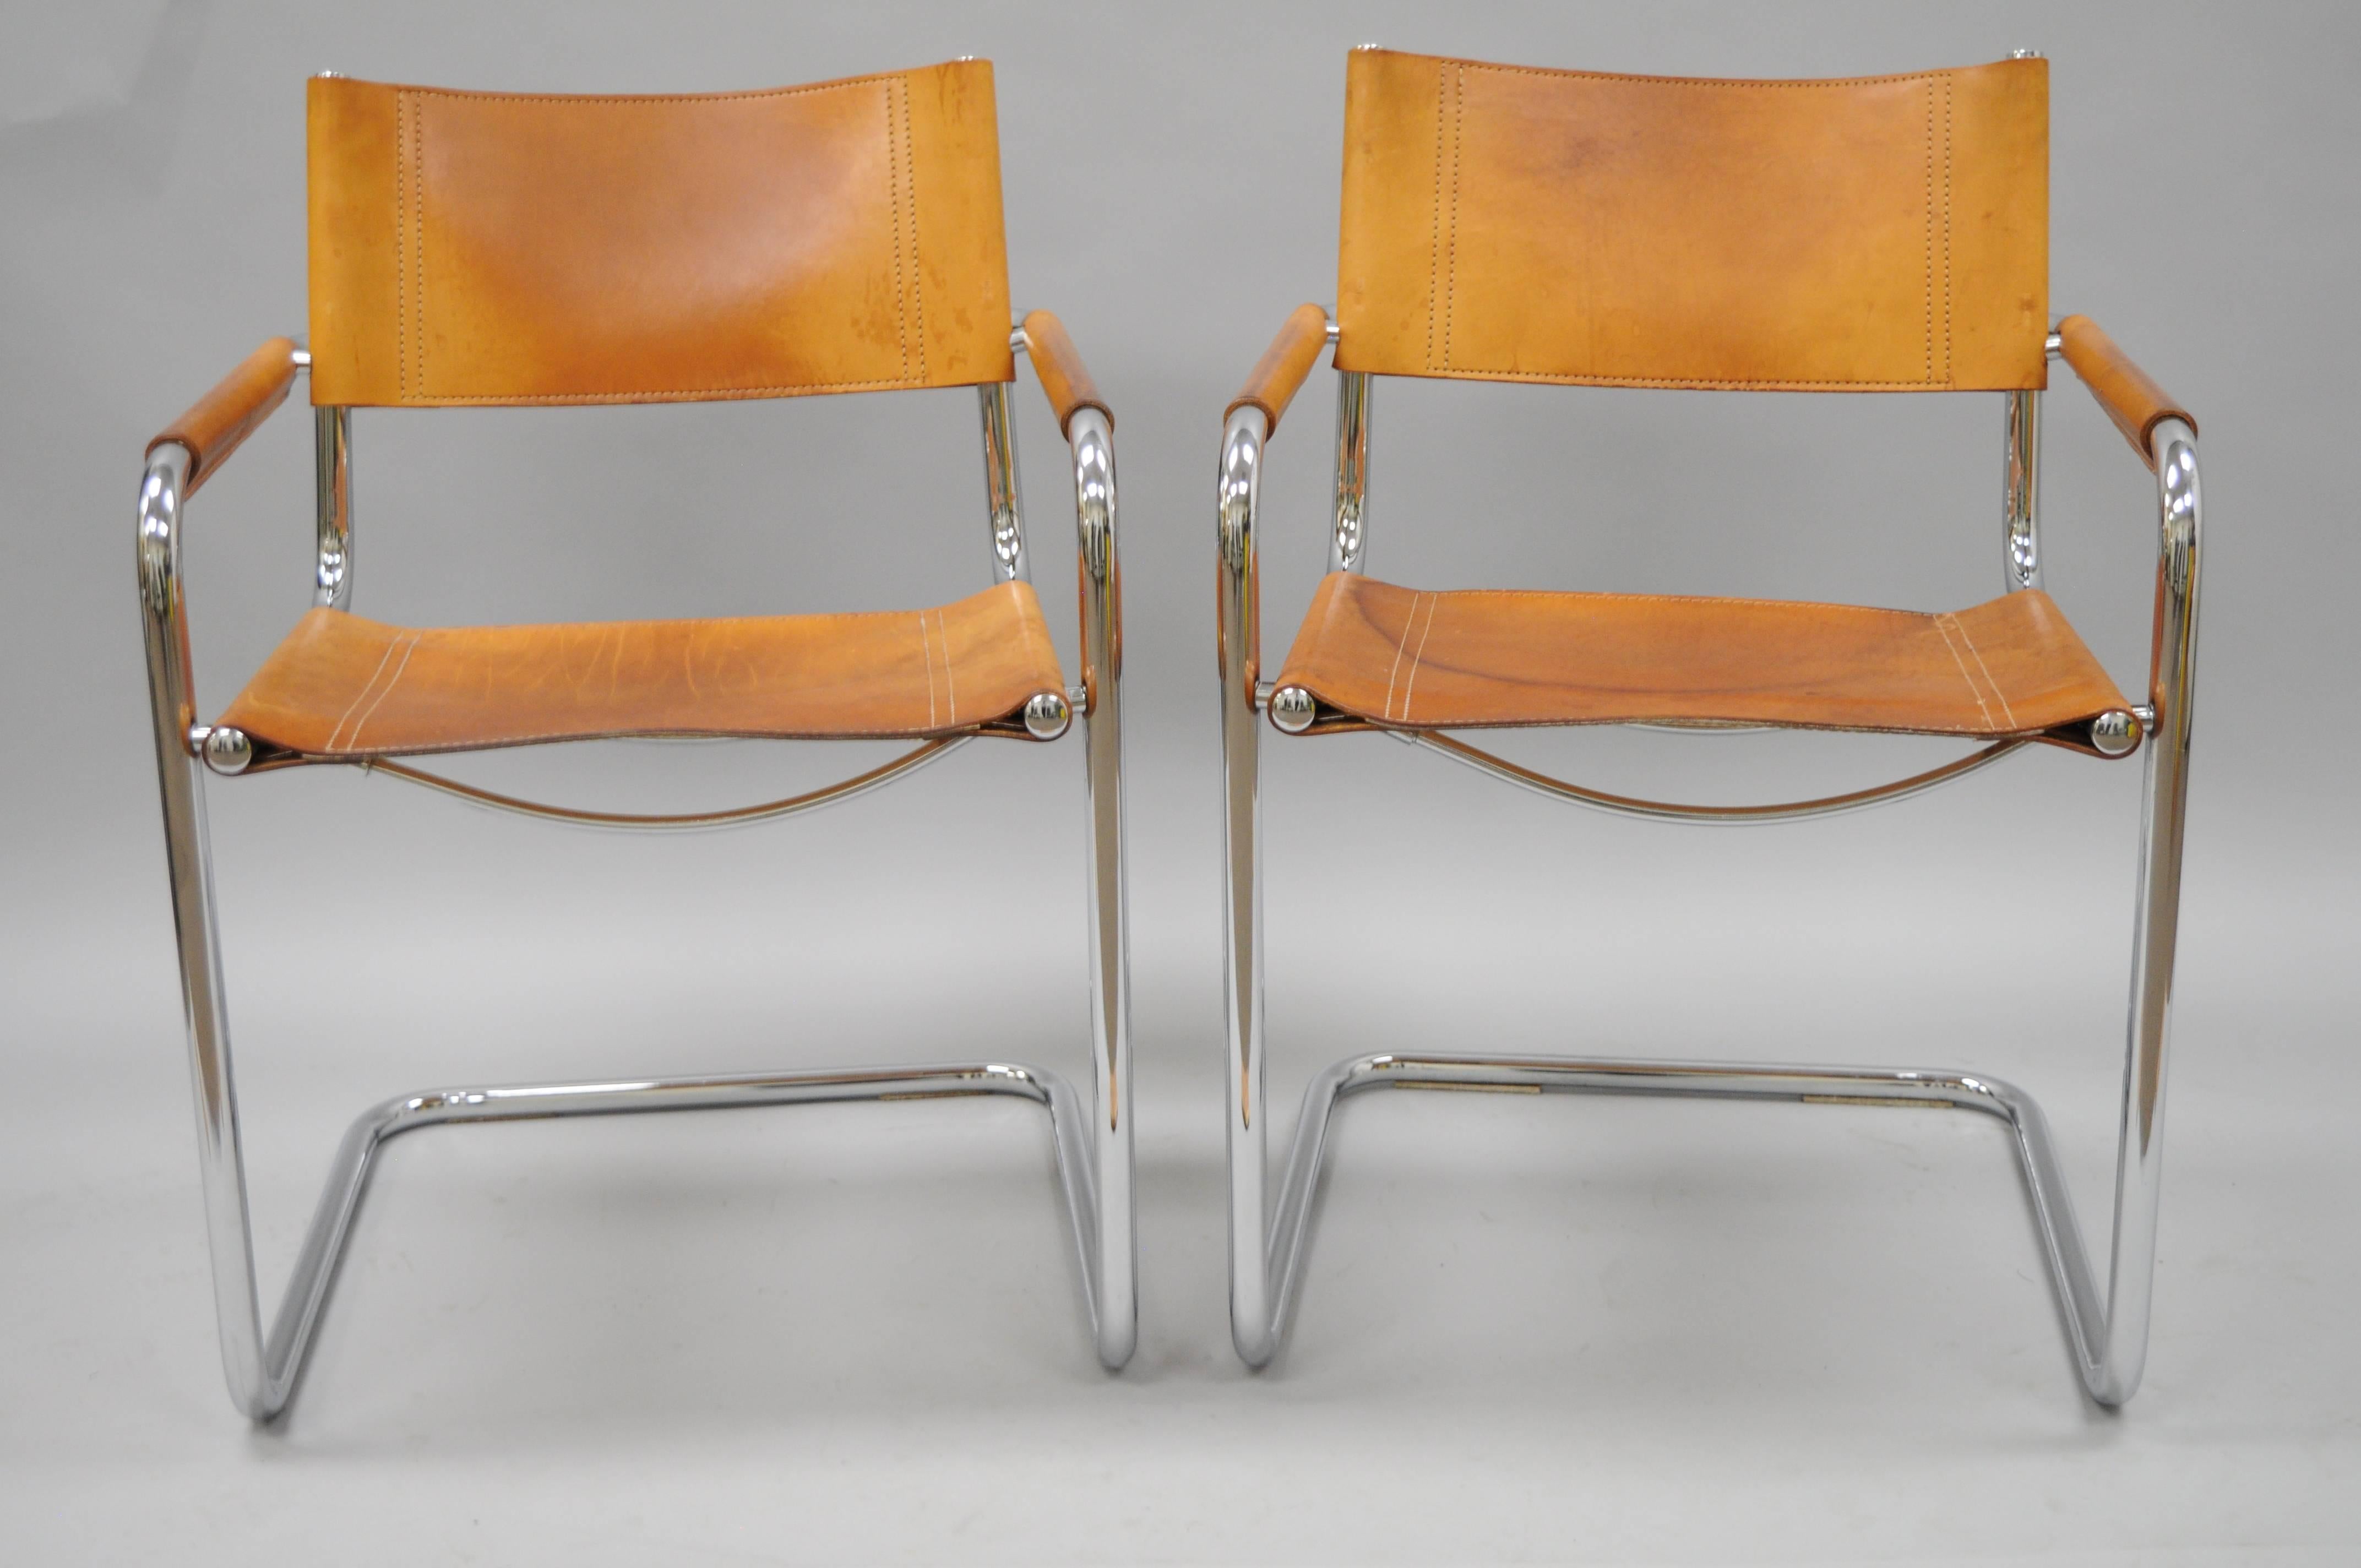 Pair of vintage Mid-Century Italian Modern cognac leather S34 dining armchairs attributed to Mart Stam for Fasem. Chairs feature polished tubular chrome frames, beautiful hand-stitched cognac brown leather with desirable and authentic patina to